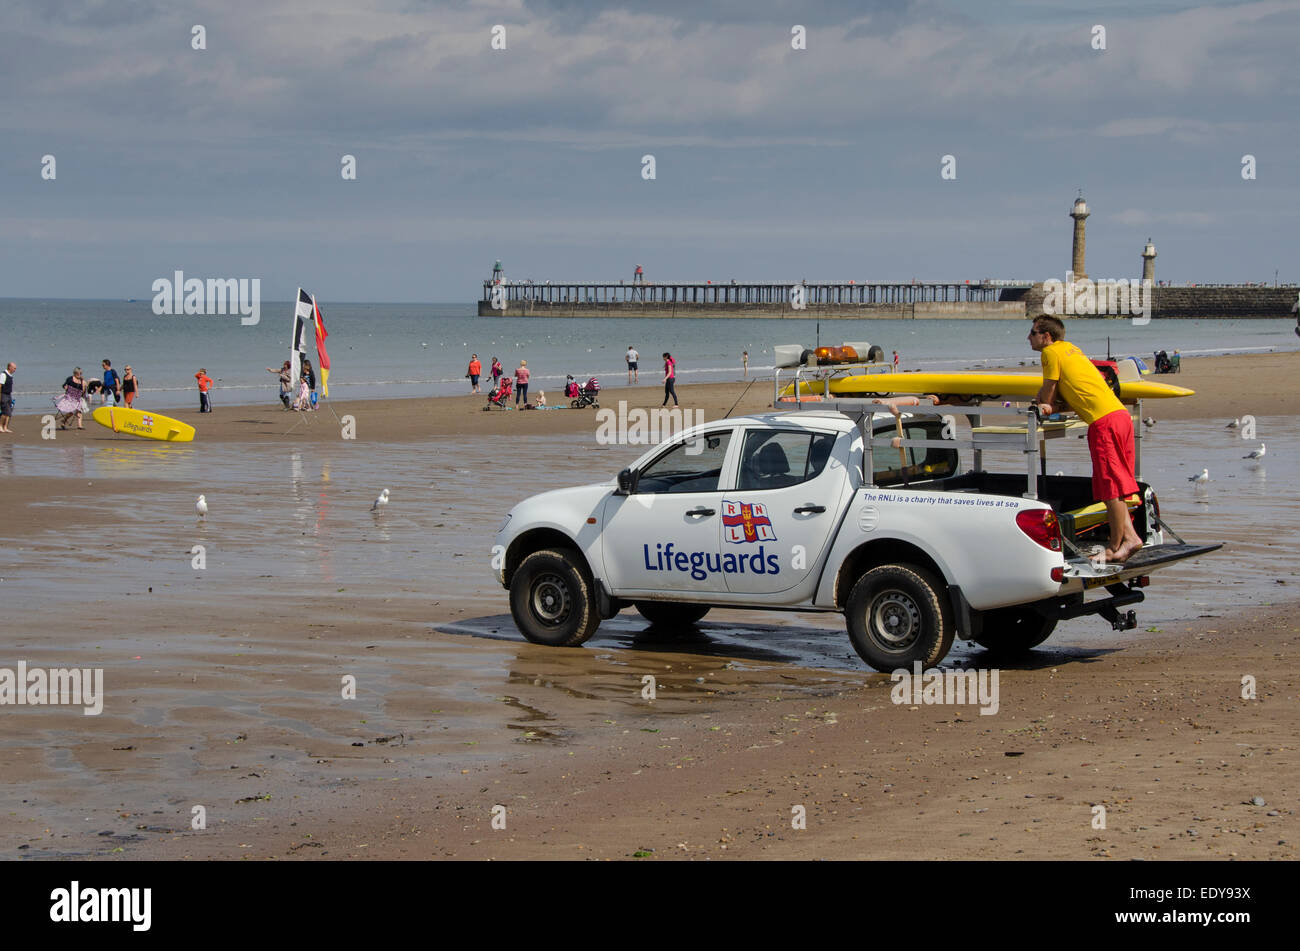 Young man on duty as RNLI lifeguard is watching people in sea & standing on back of parked pick-up truck - Whitby beach, North Yorkshire, England, UK. Stock Photo